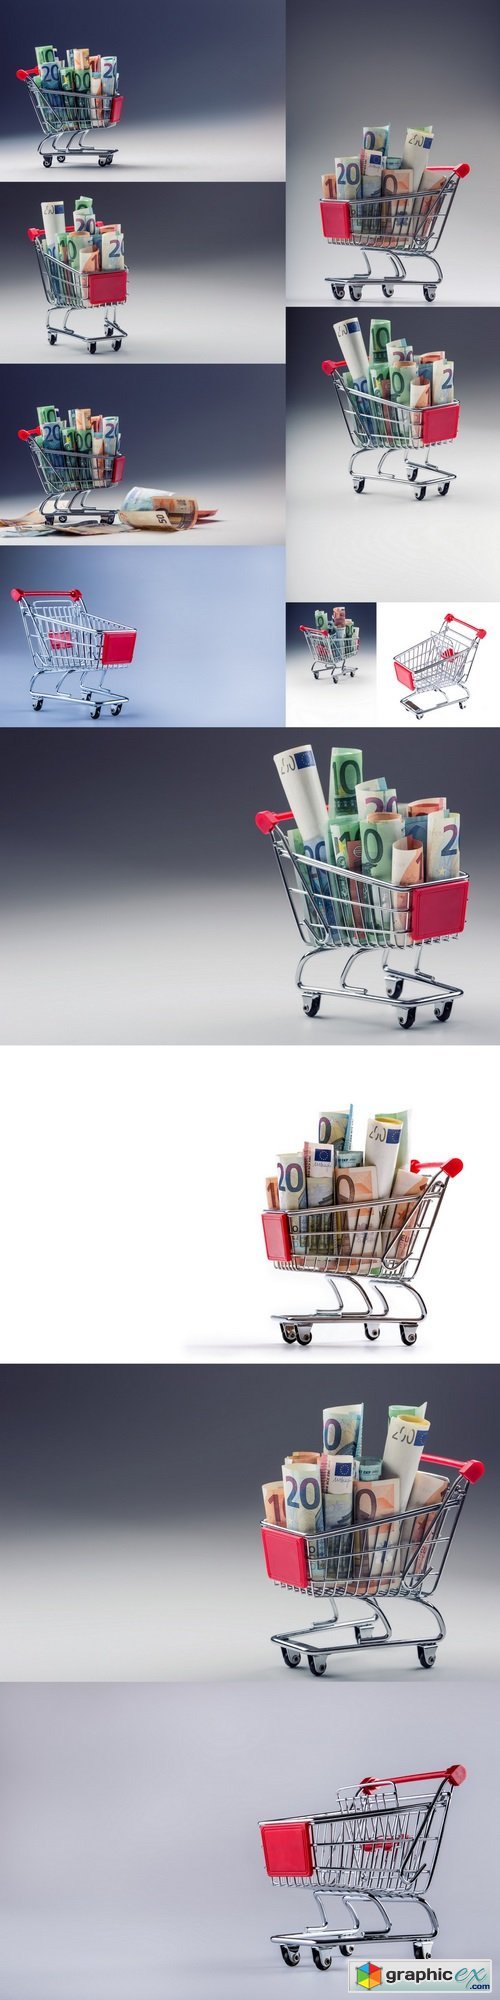 Shopping trolley full of euro money - banknotes